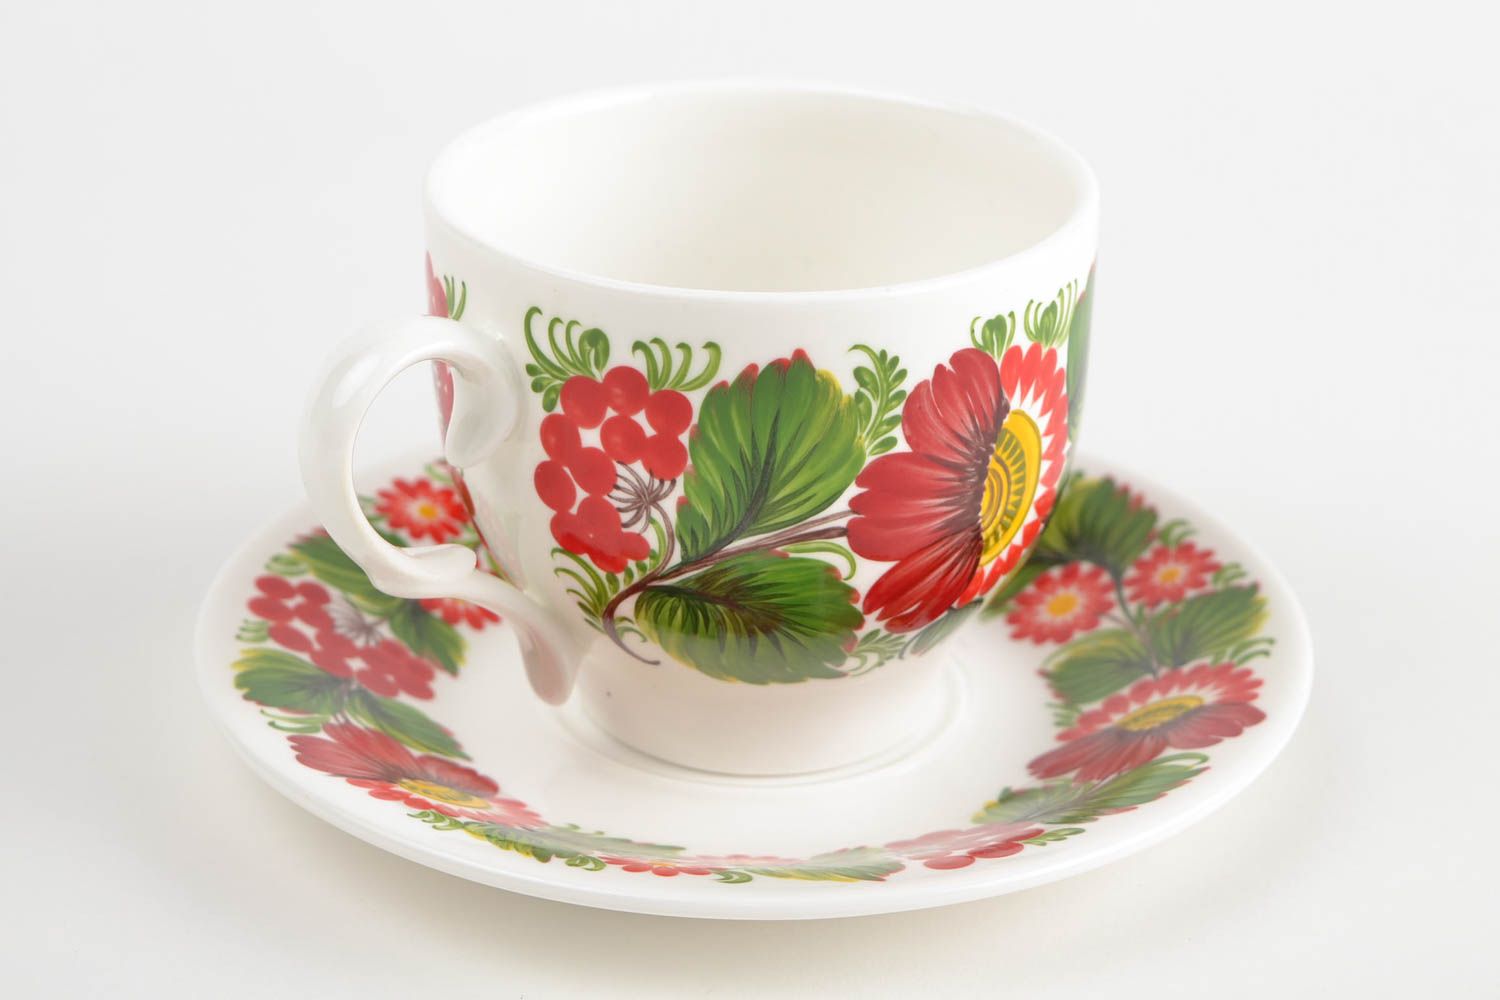 8 oz white porcelain teacup in bright floral red and green colors with handle and saucer photo 4